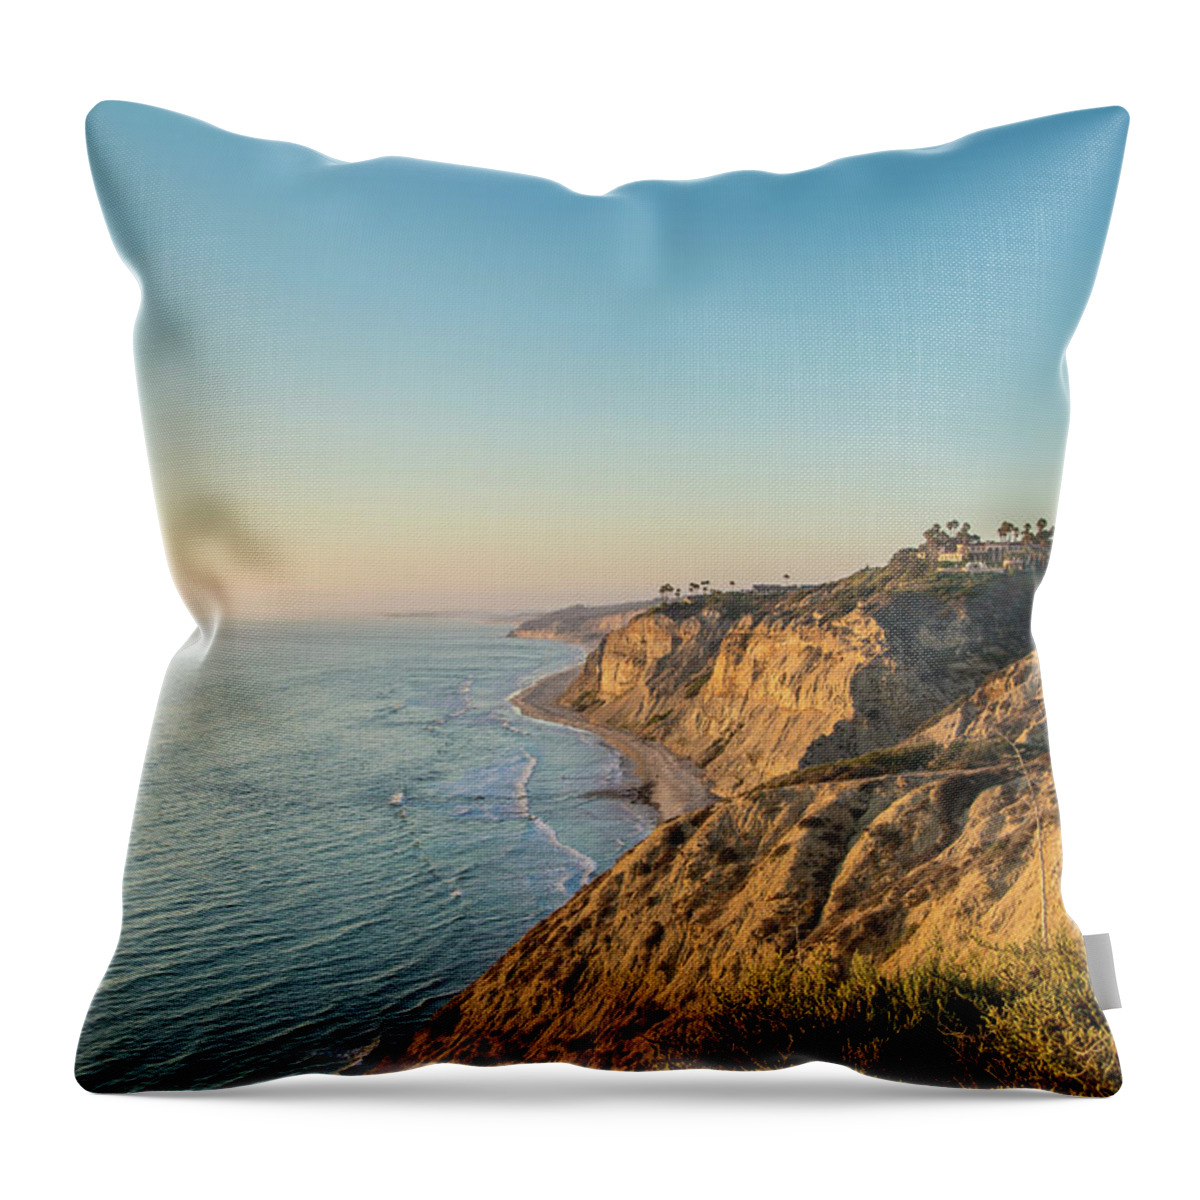 Photosbymch Throw Pillow featuring the photograph Torrey Pines Coast at Sunset by M C Hood